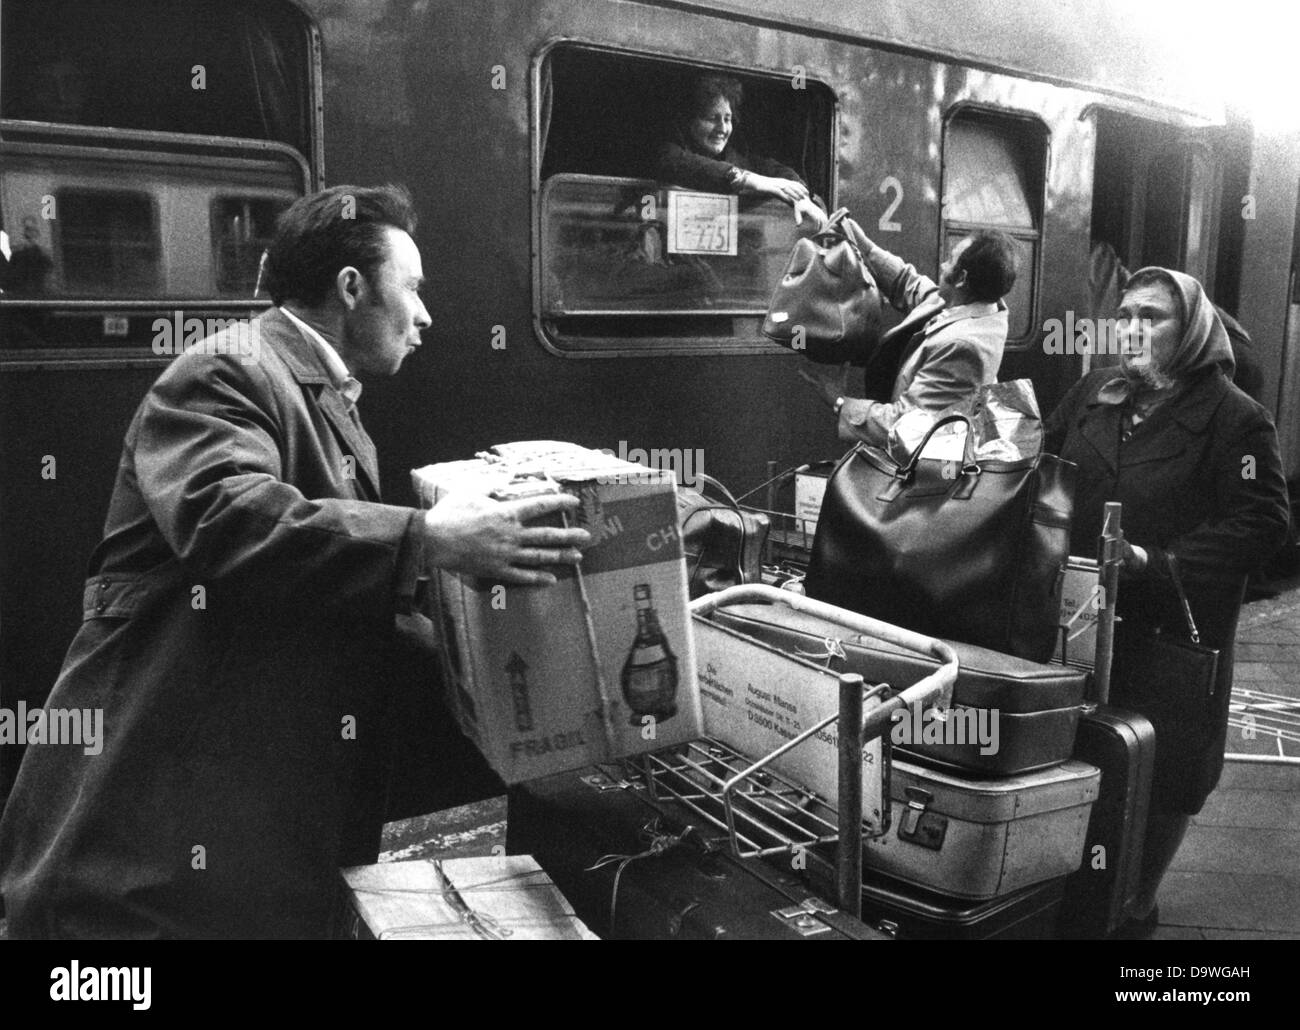 Turkish guestworker return to their homecountry and load their luggage into the Istanbul express at Frankfurt central station on the 14th of April in 1977. Stock Photo